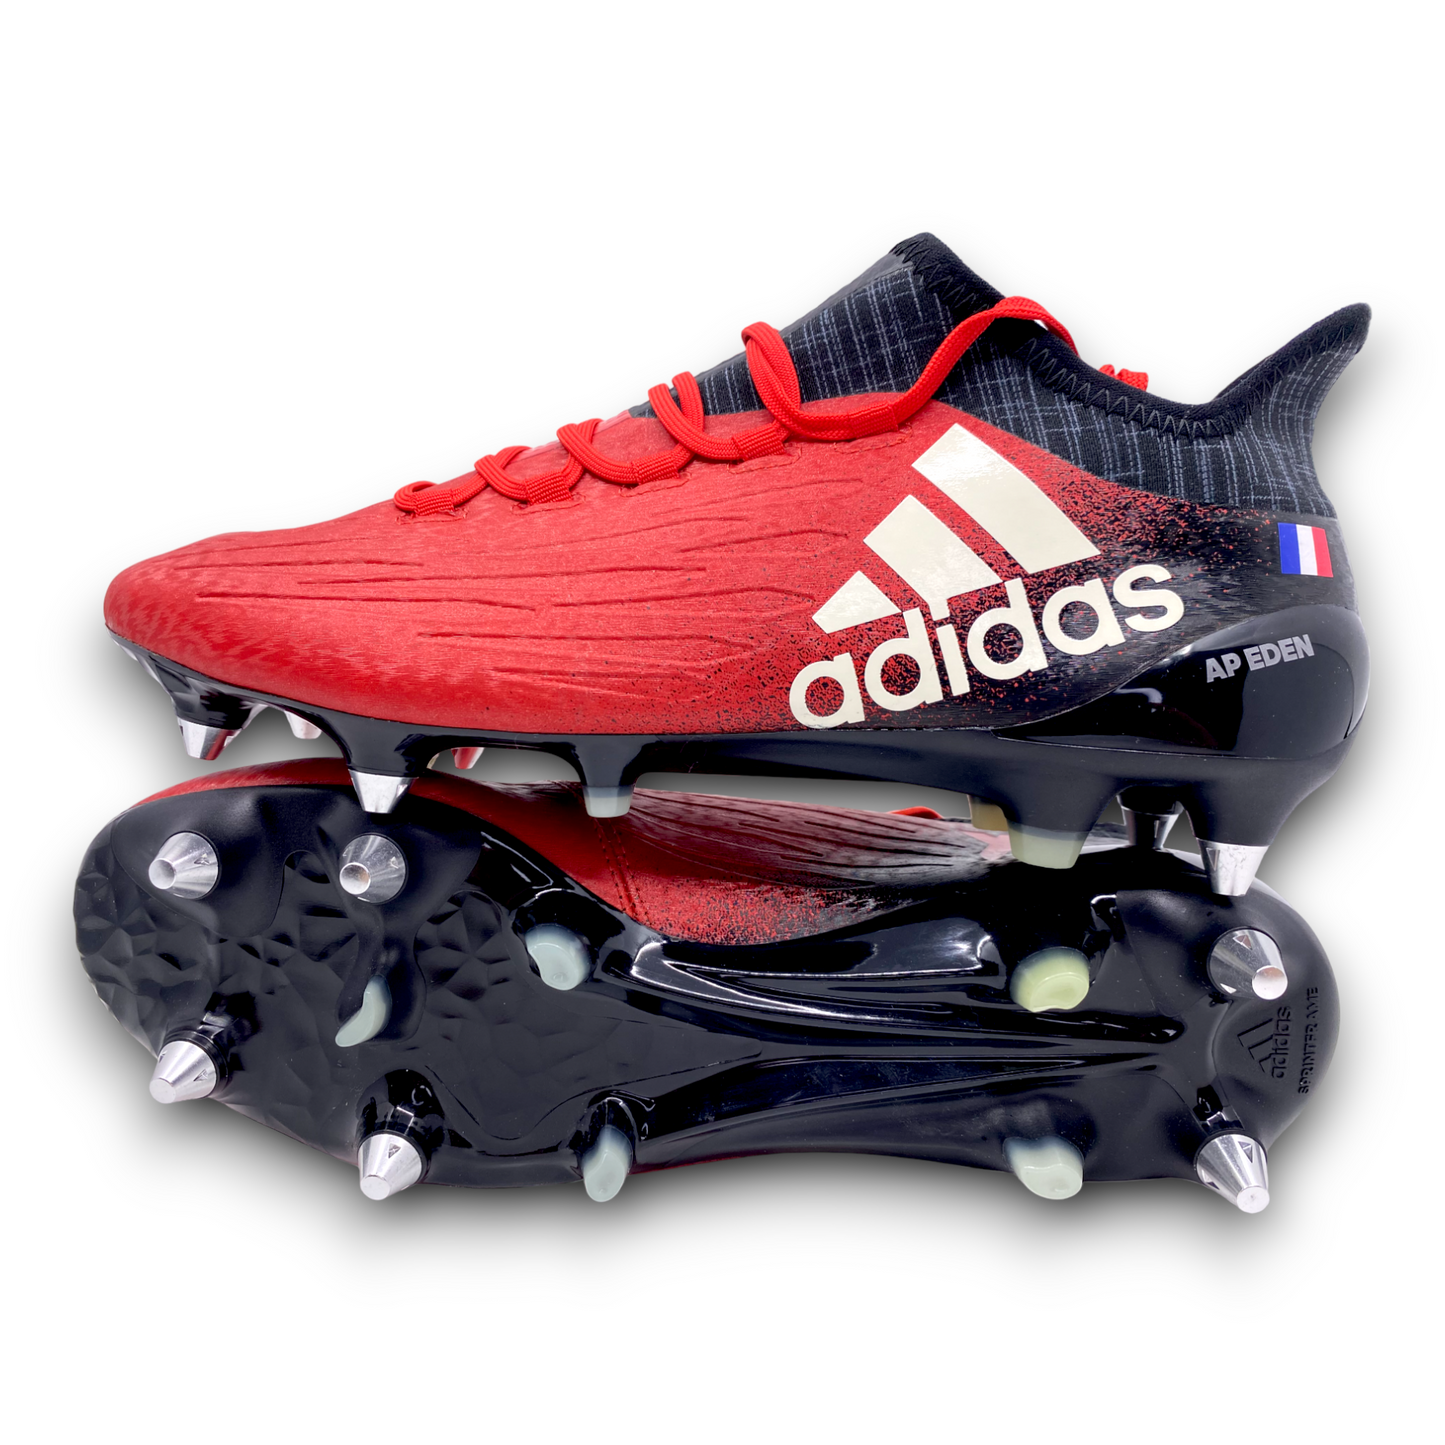 Adidas X 16.1 SG "Pack Red Limit" Athlete service Andre – shoptcrampons